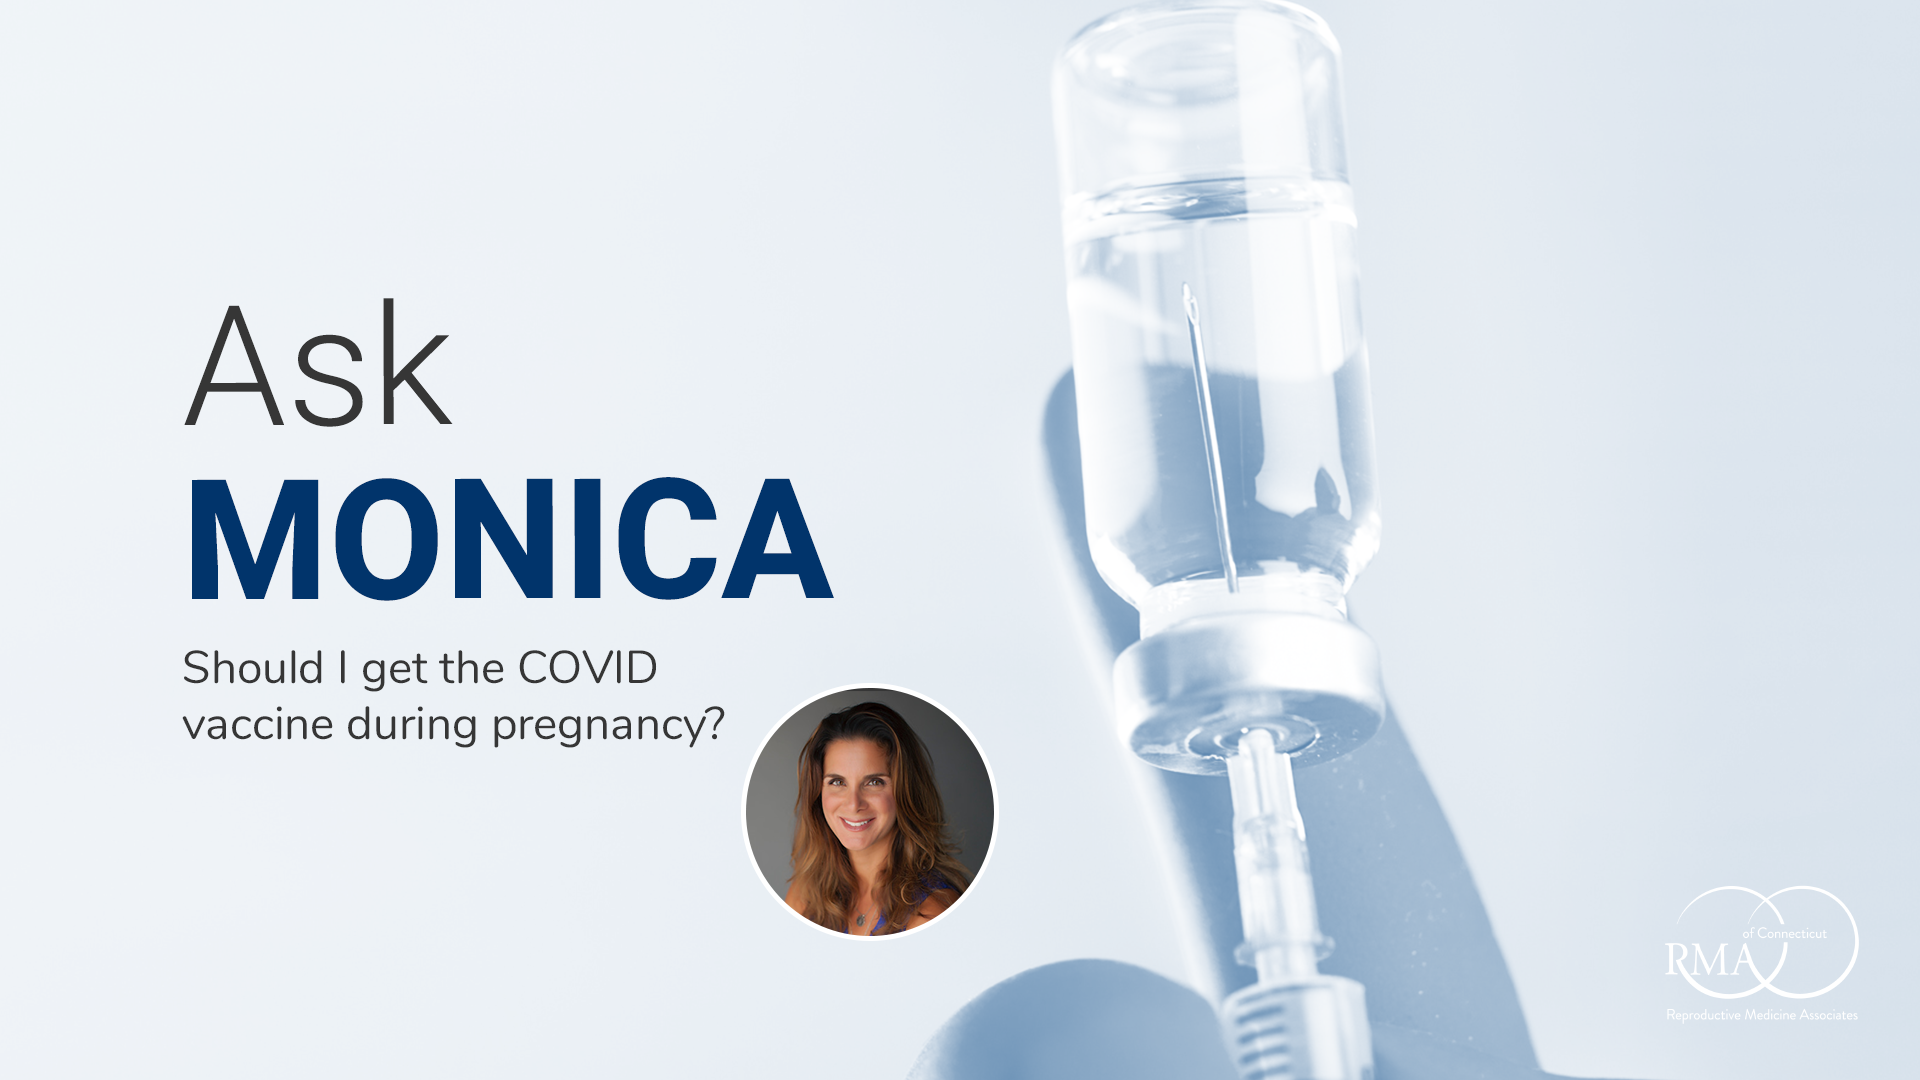 Episode 16: Should I get the COVID vaccine during pregnancy?